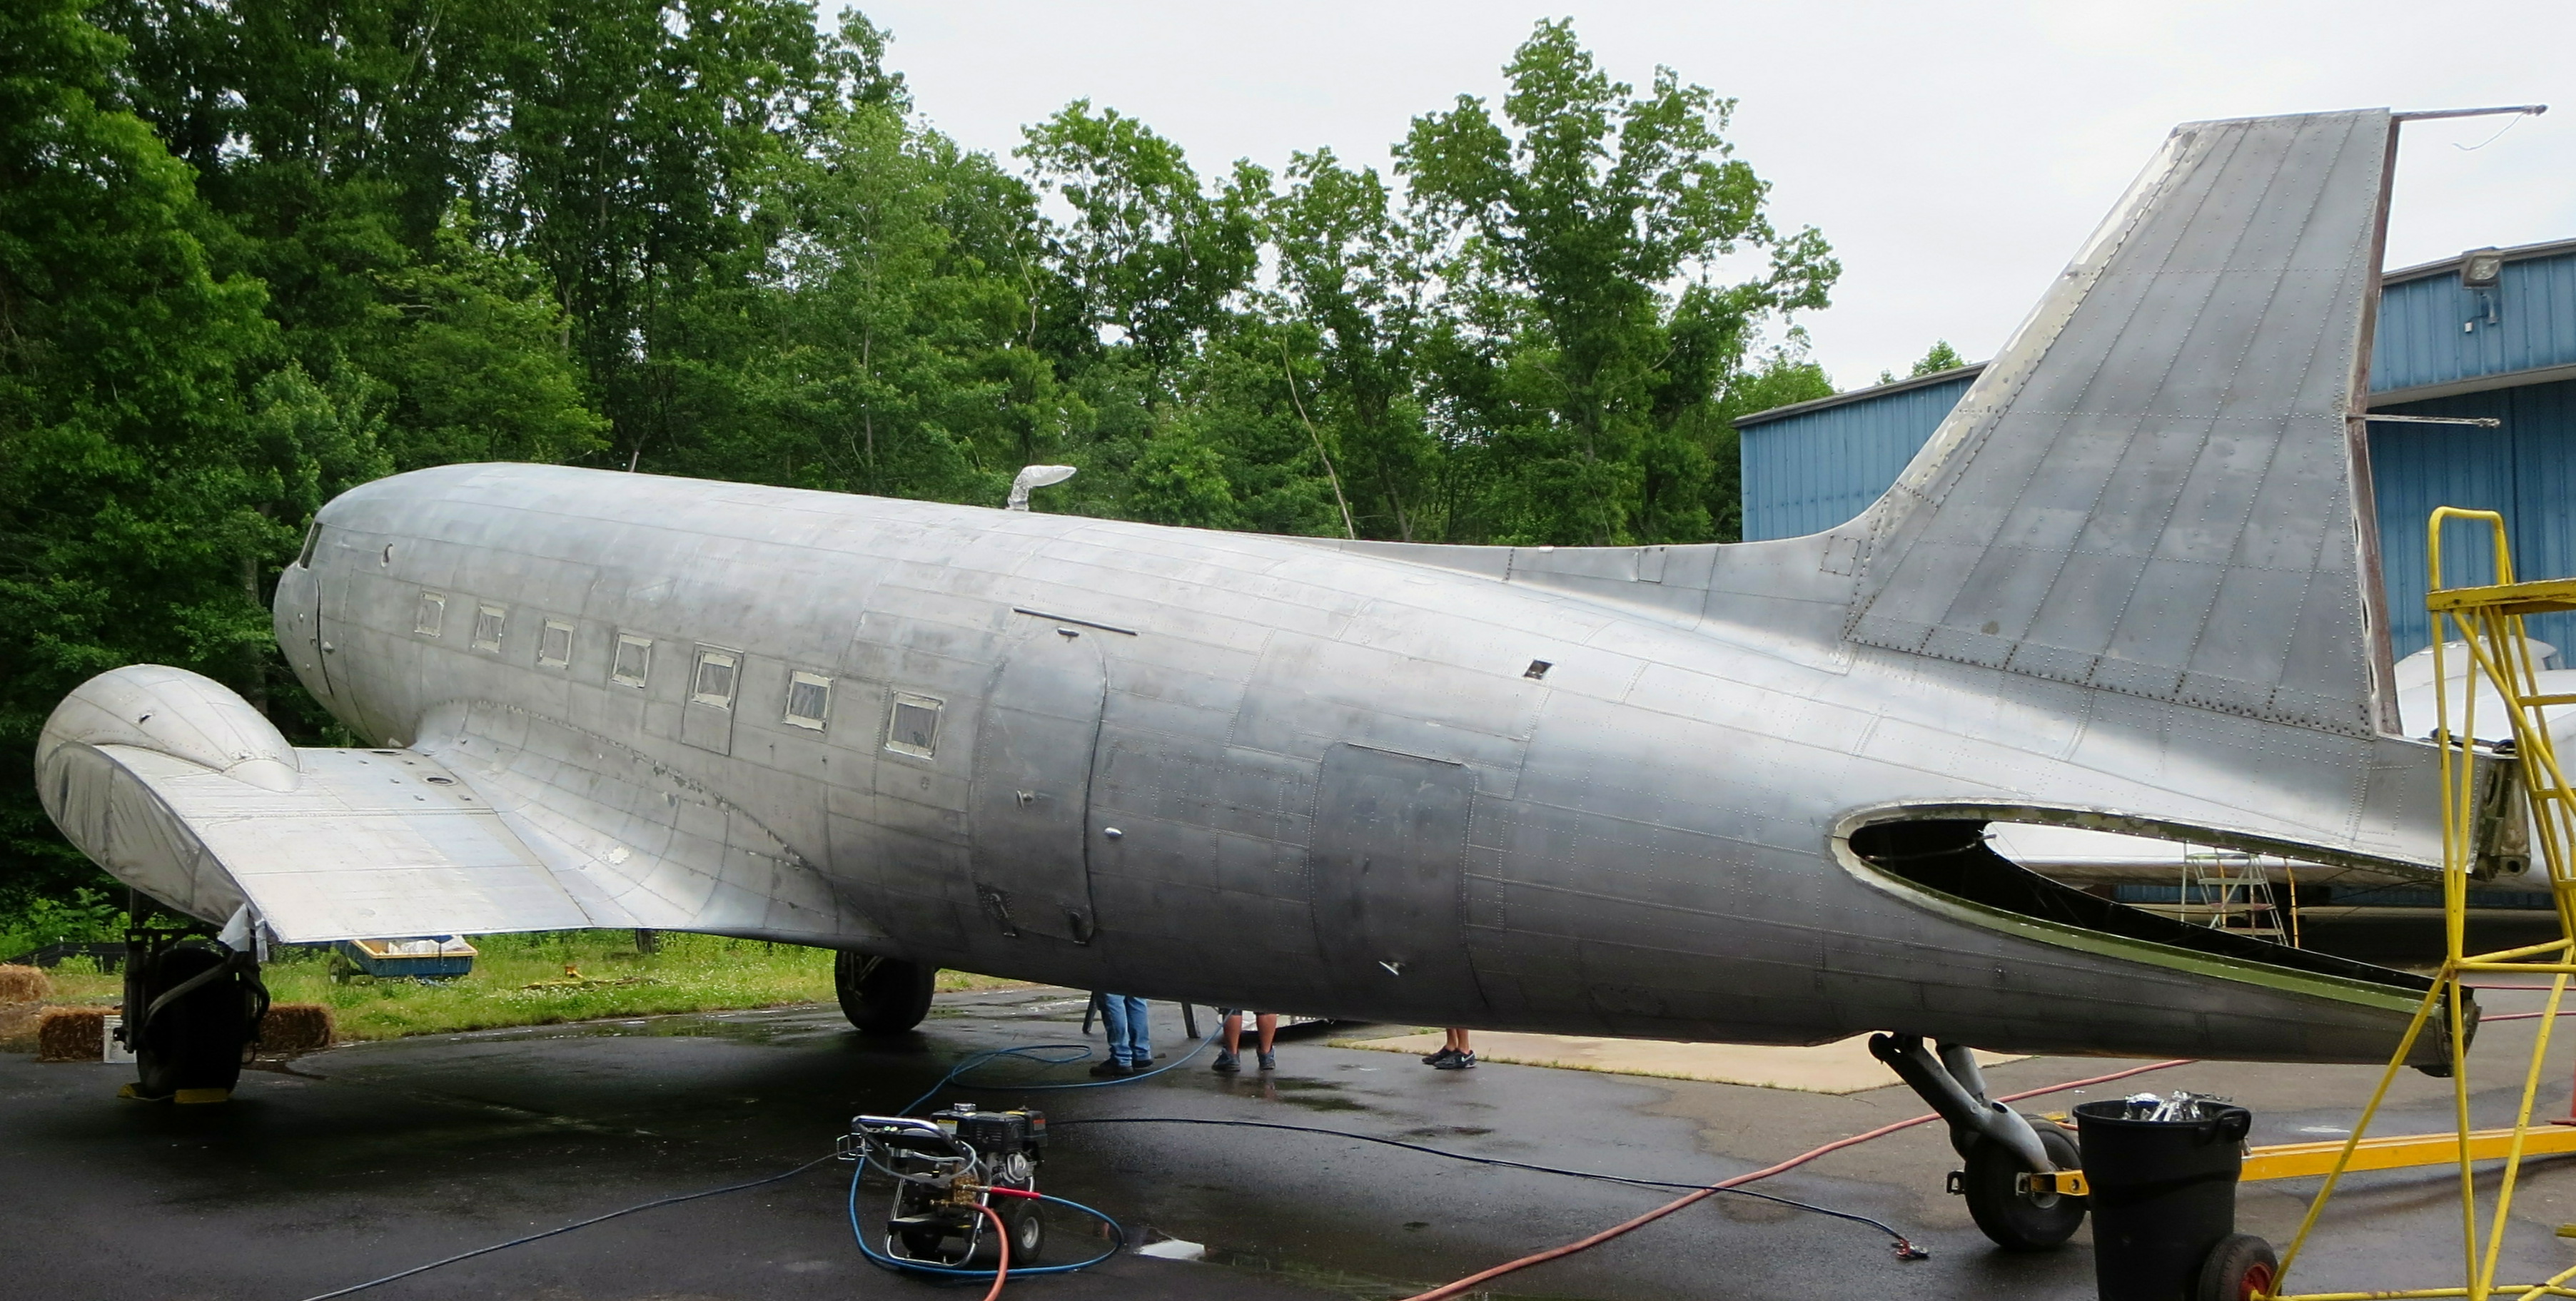 The DC-3 following paint stripping in 2014. (photo via NEAM)